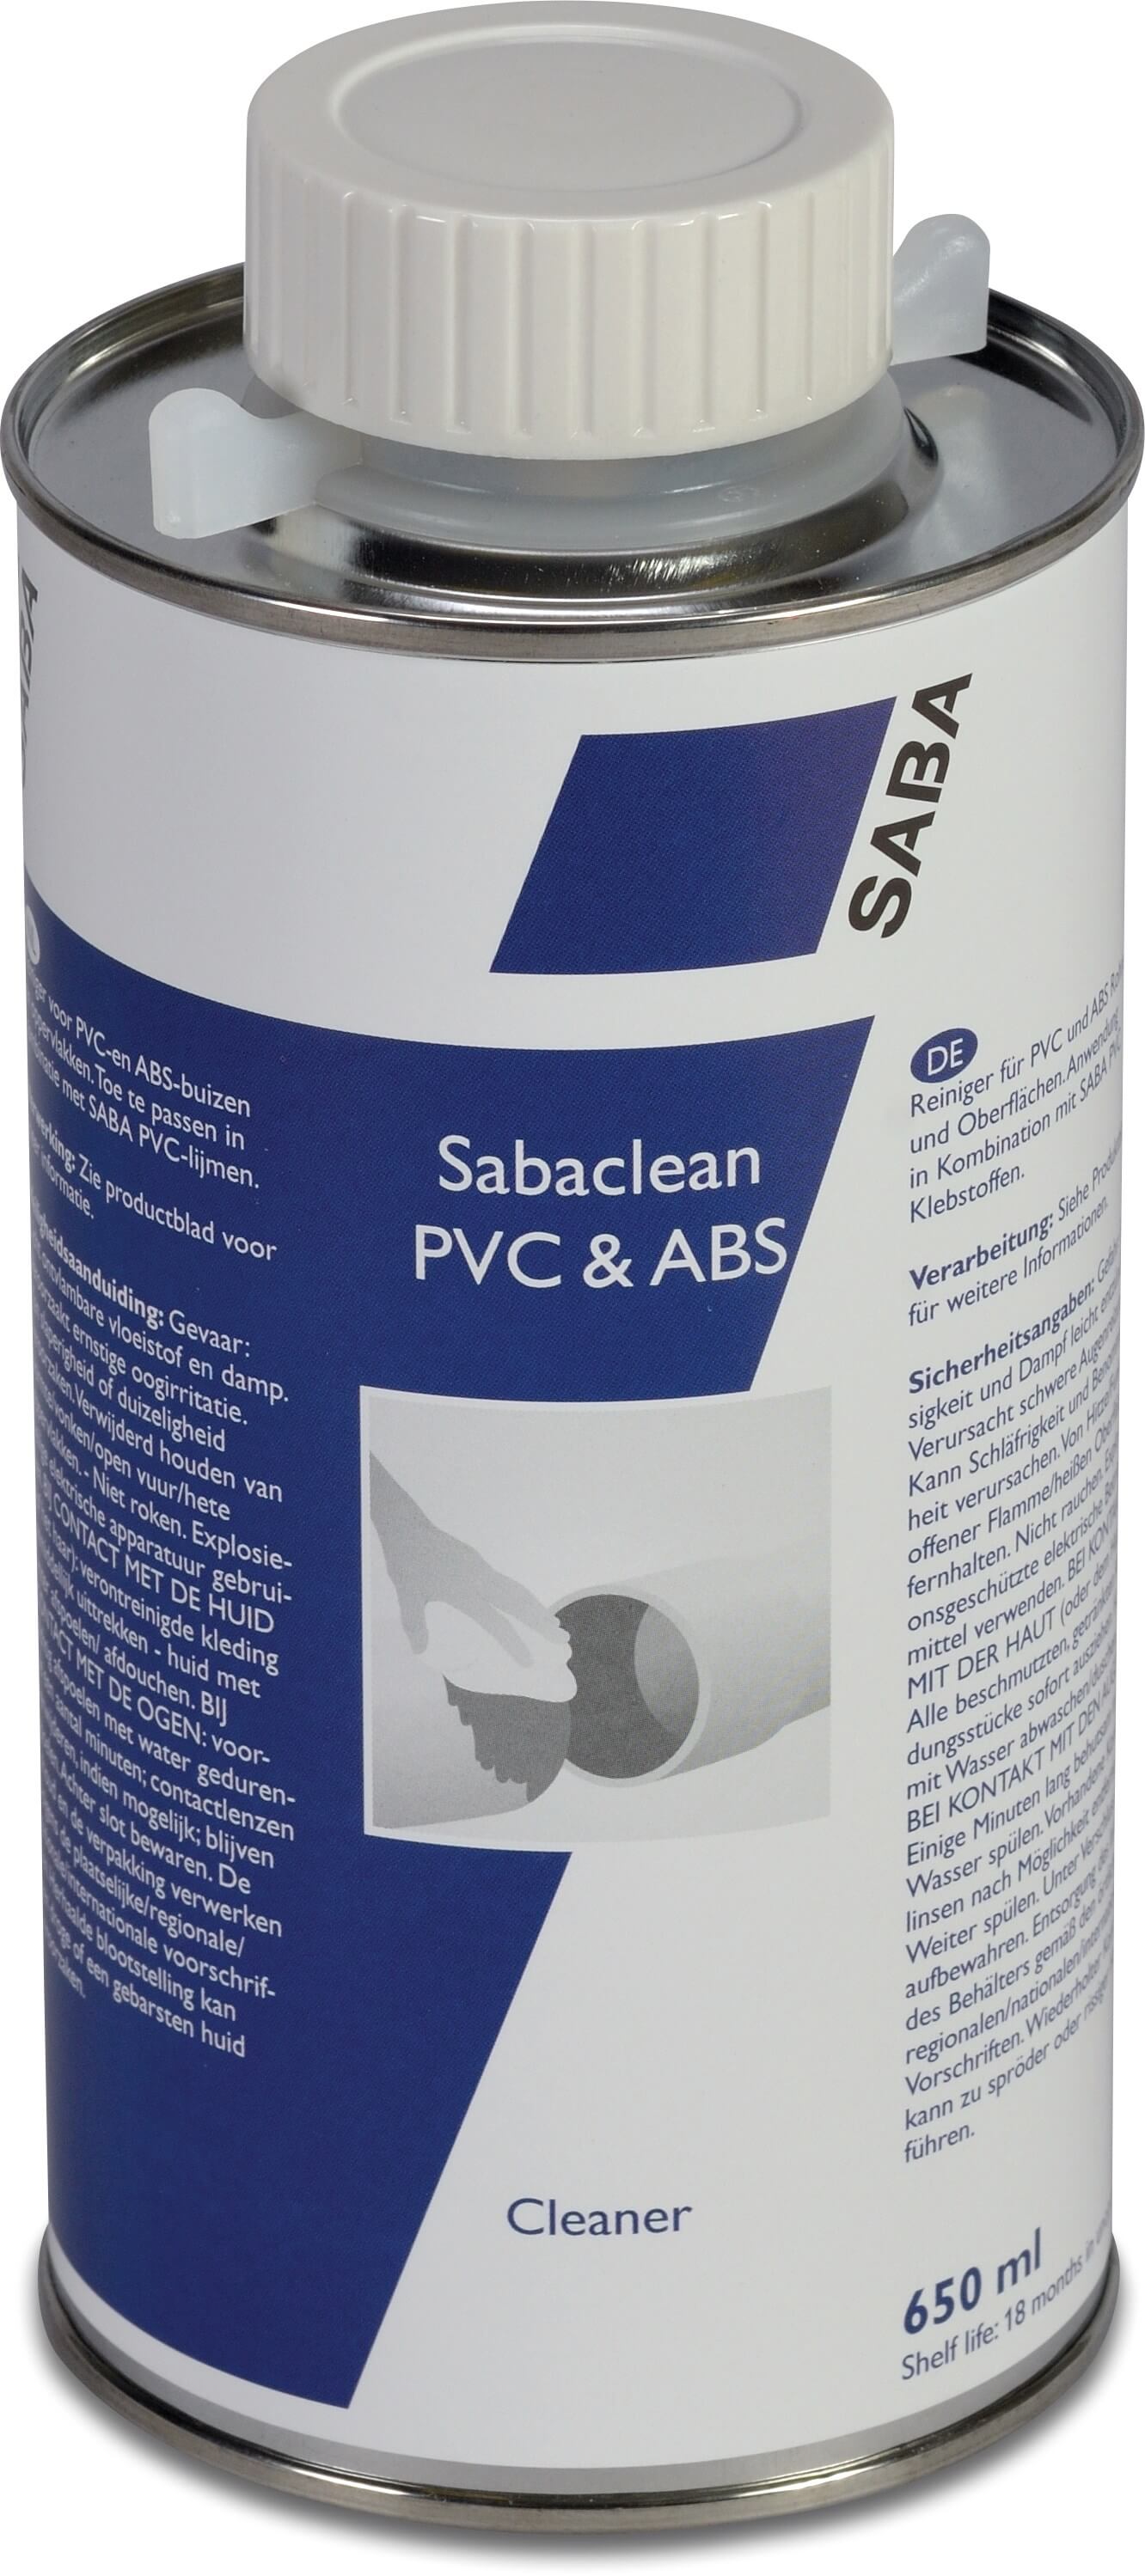 Saba Solvent cleaner 0,25ltr type Sabaclean PVC & ABS